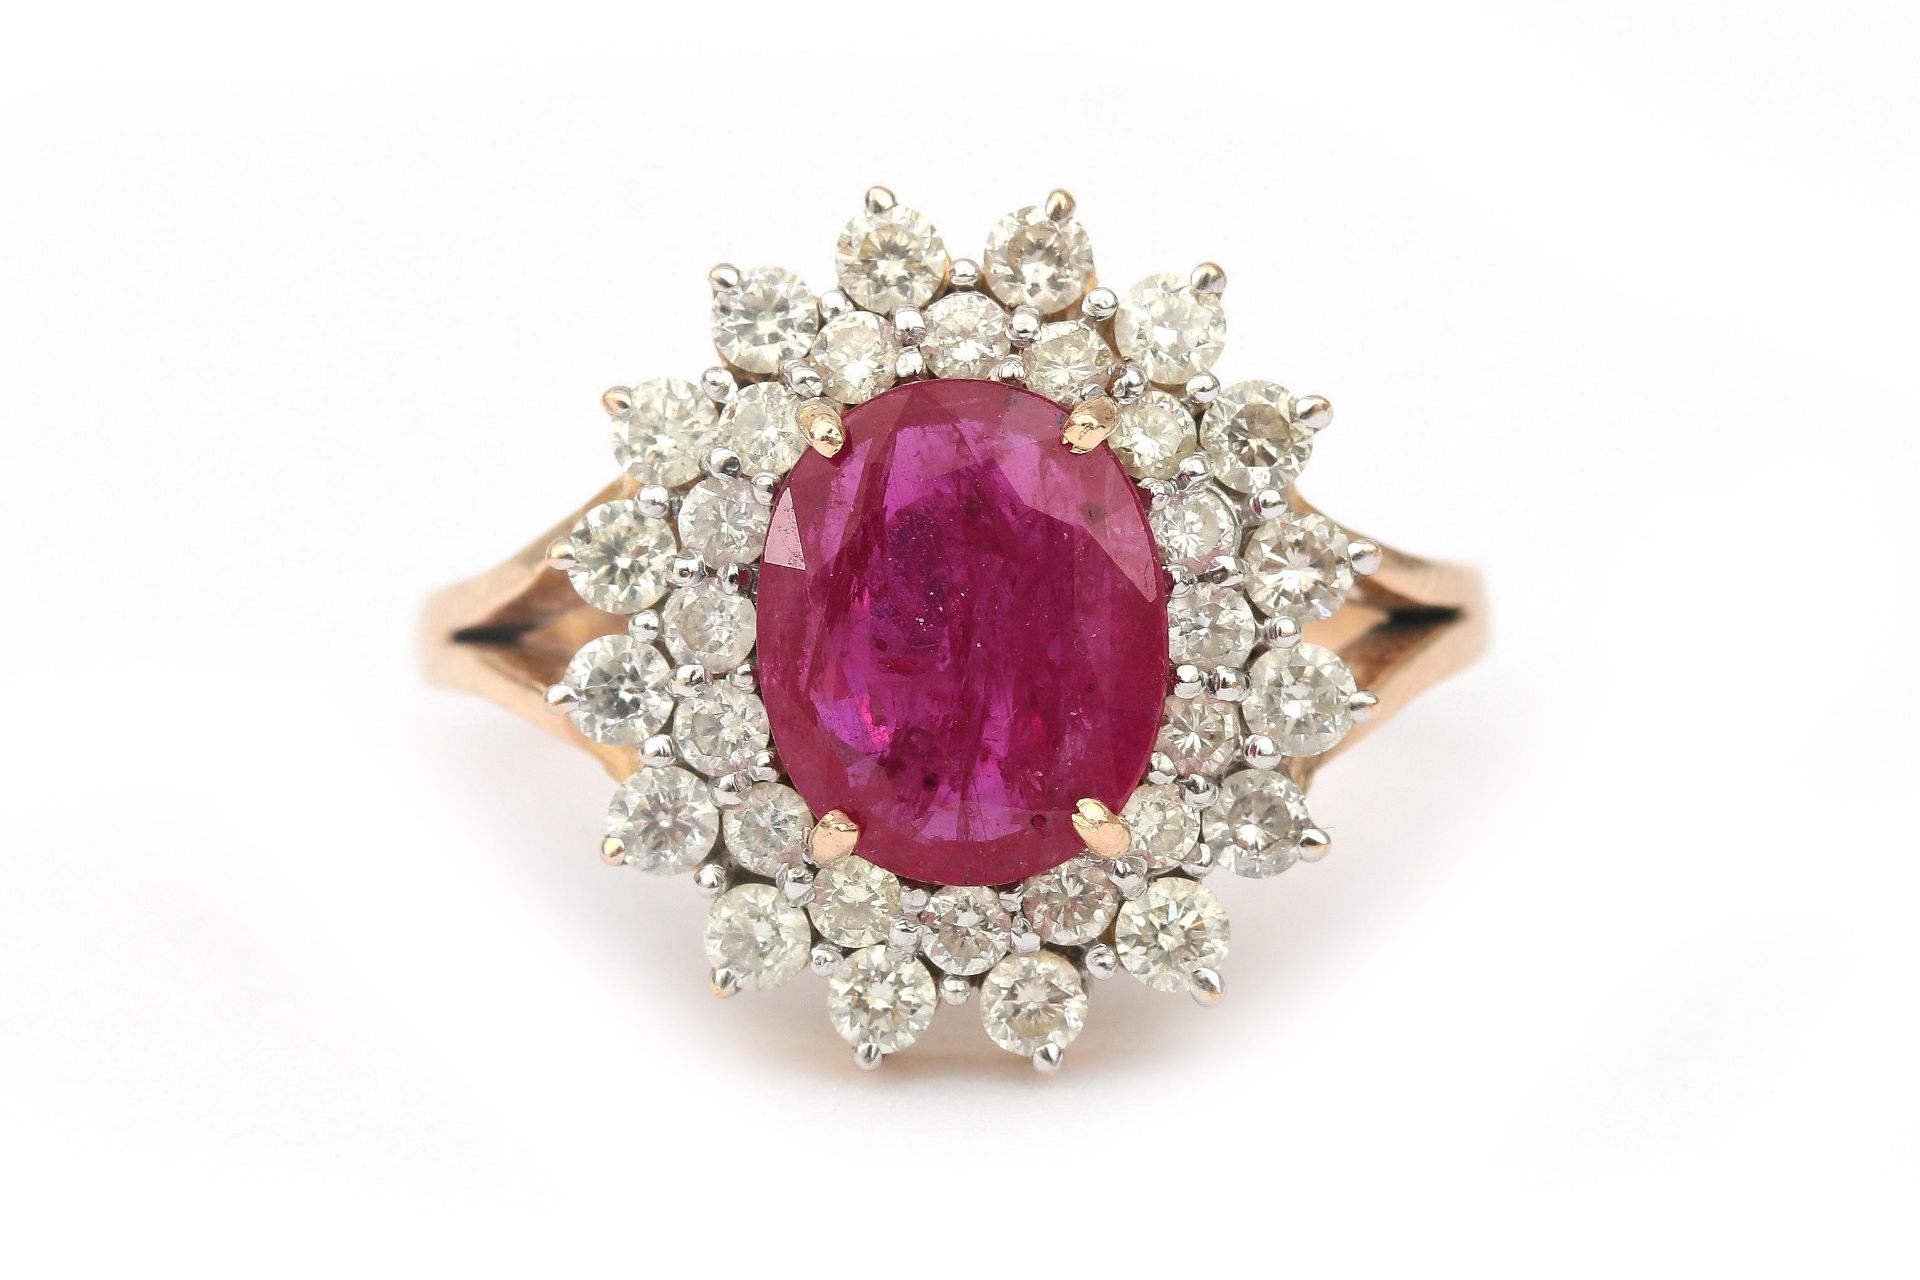 A 14 karat gold ruby and diamond cluster ring